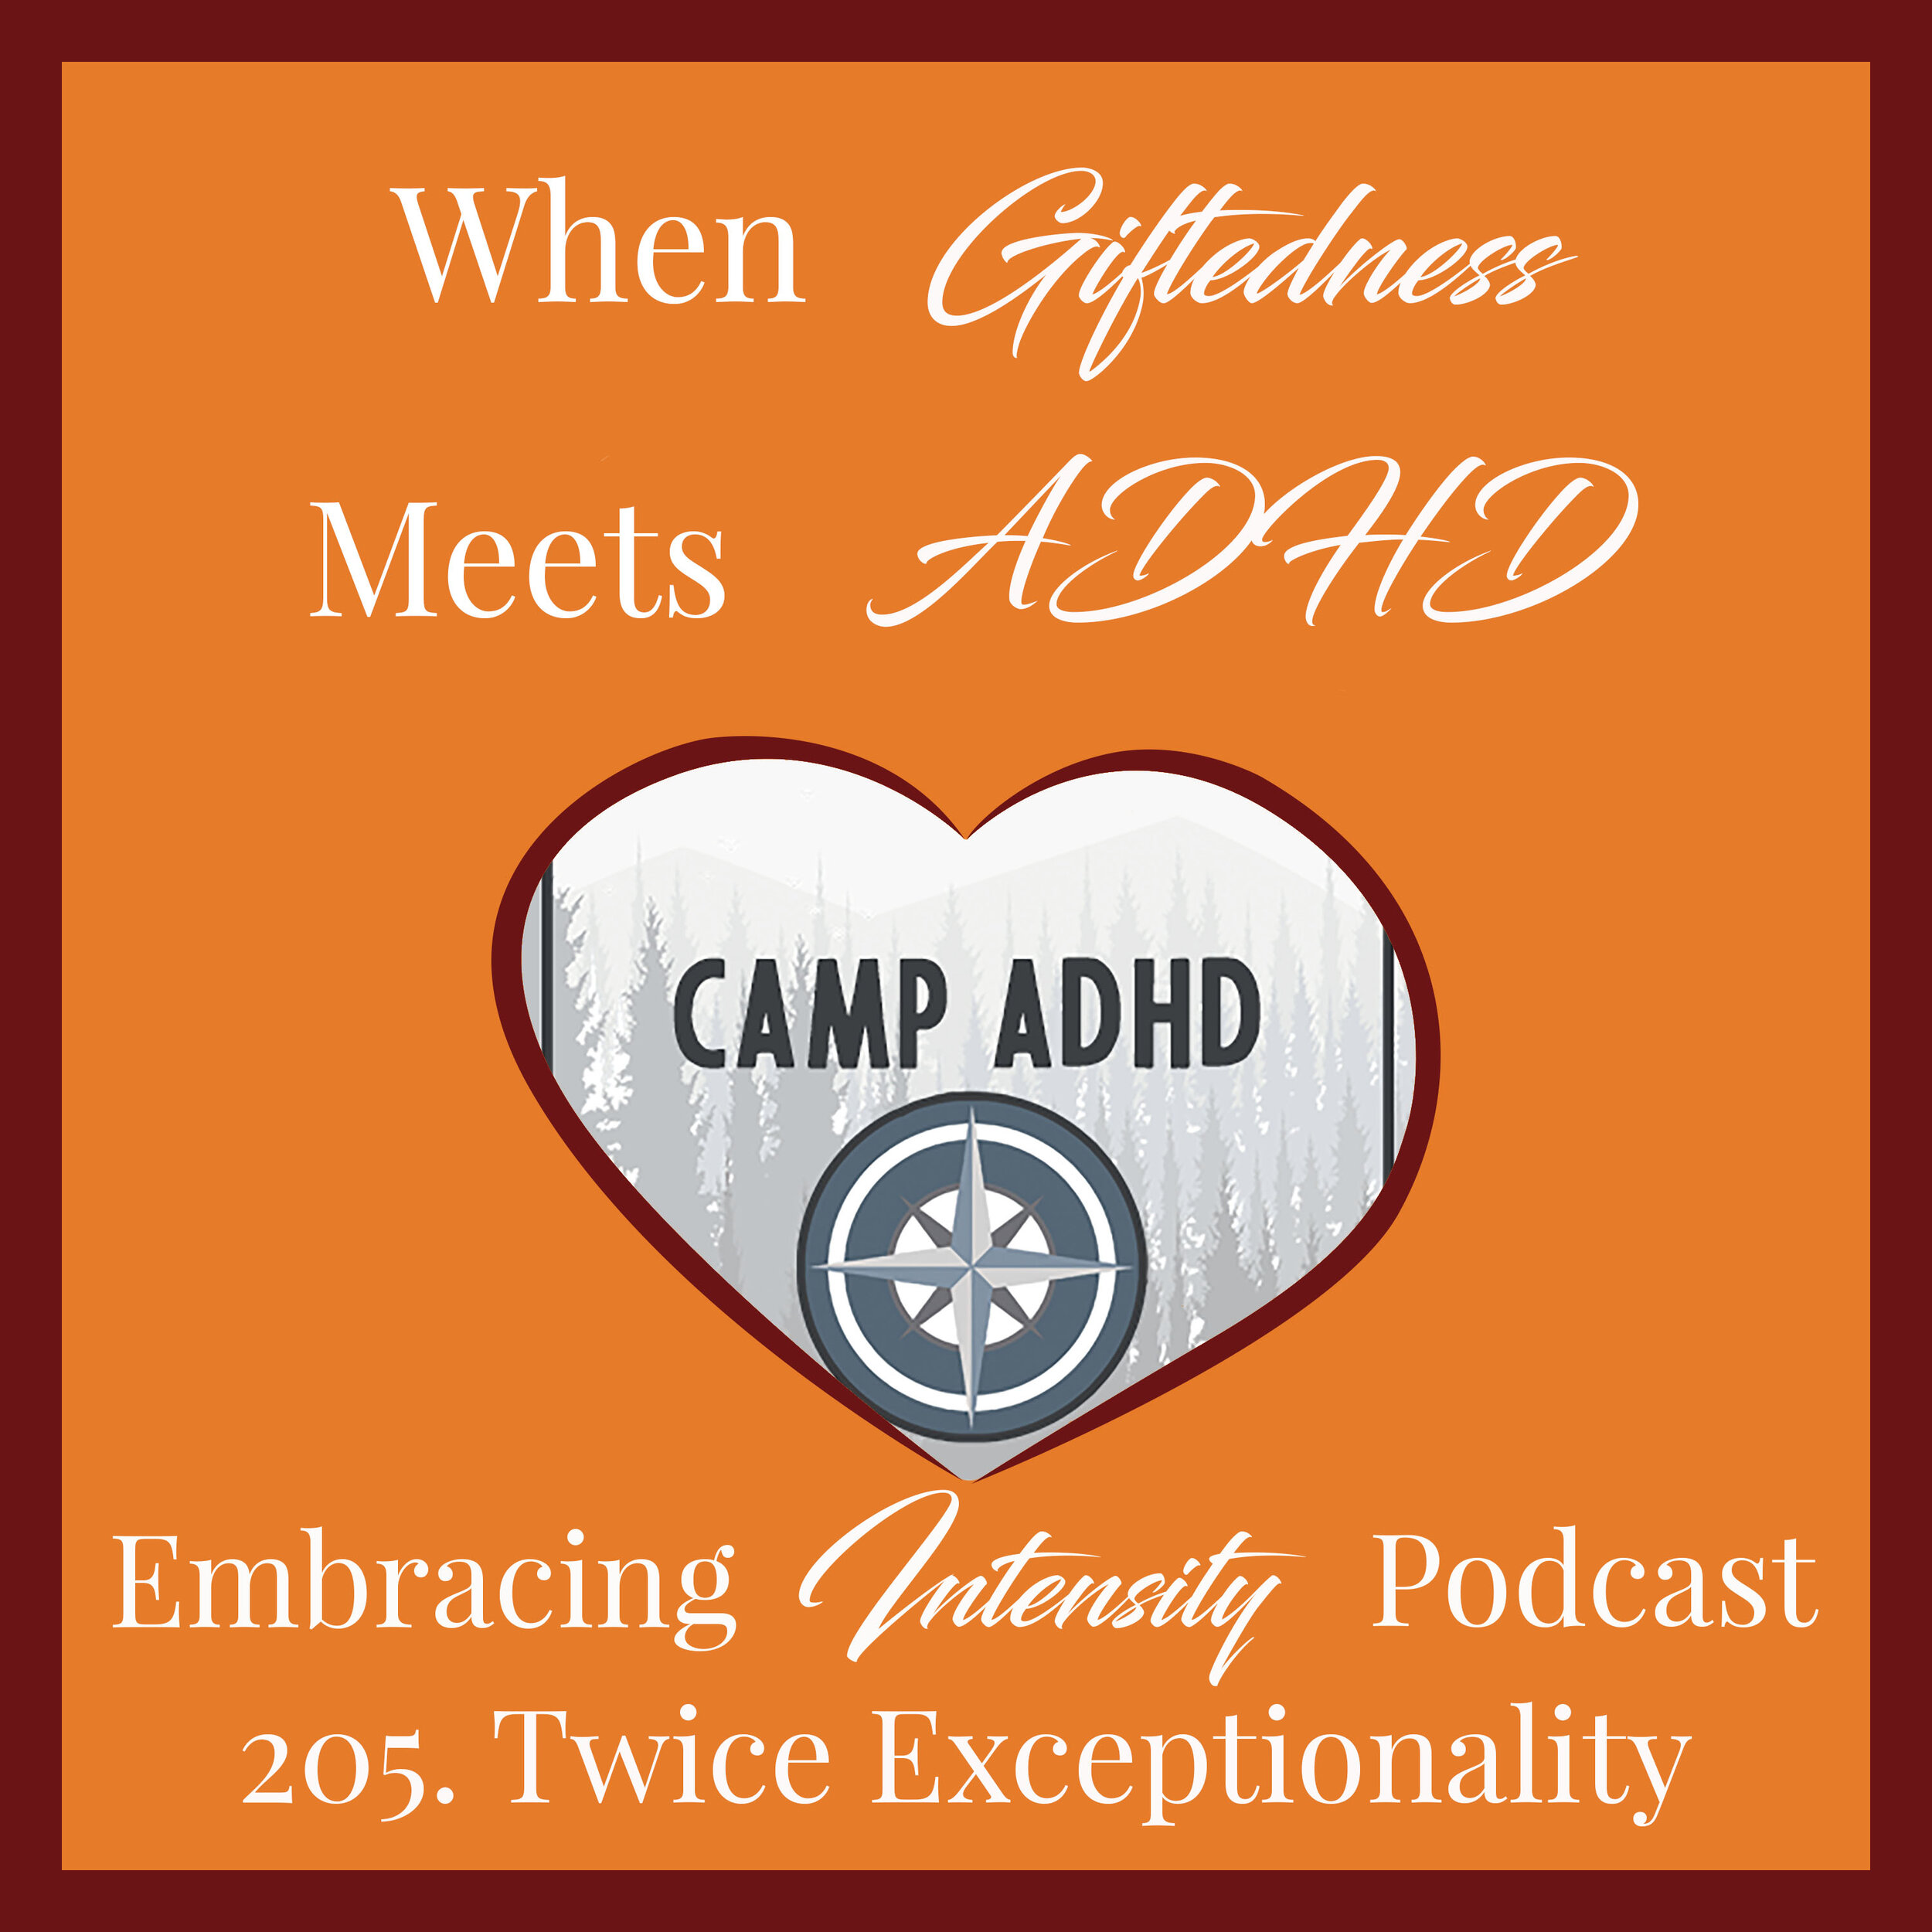 Twice Exceptionality - When Giftedness Meets ADHD